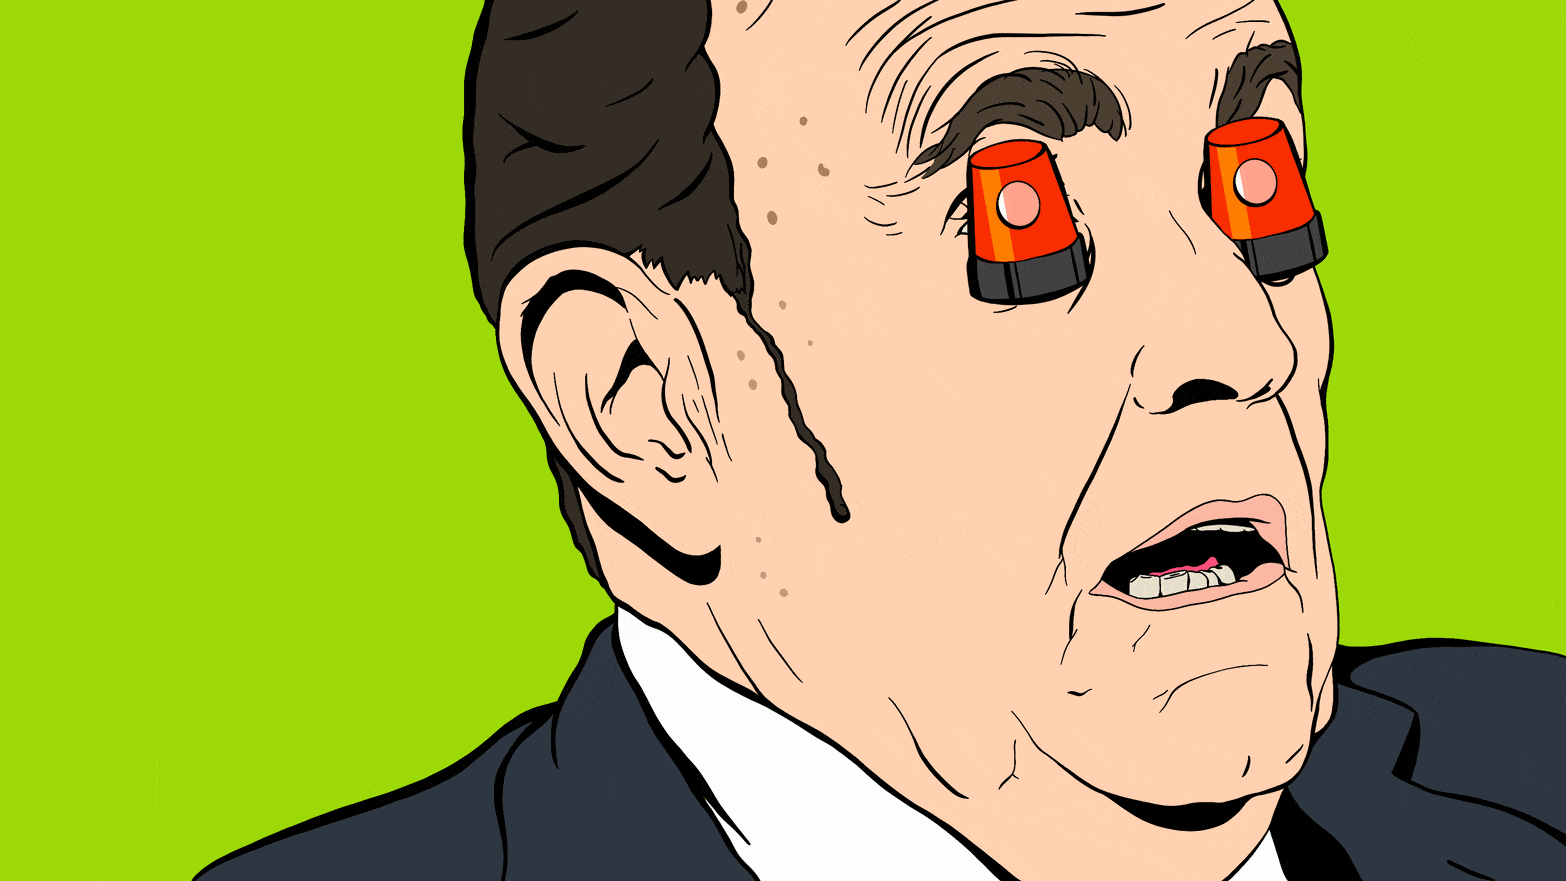 Illustration of Rudolph Giuliani with red alarm lights on his eyes